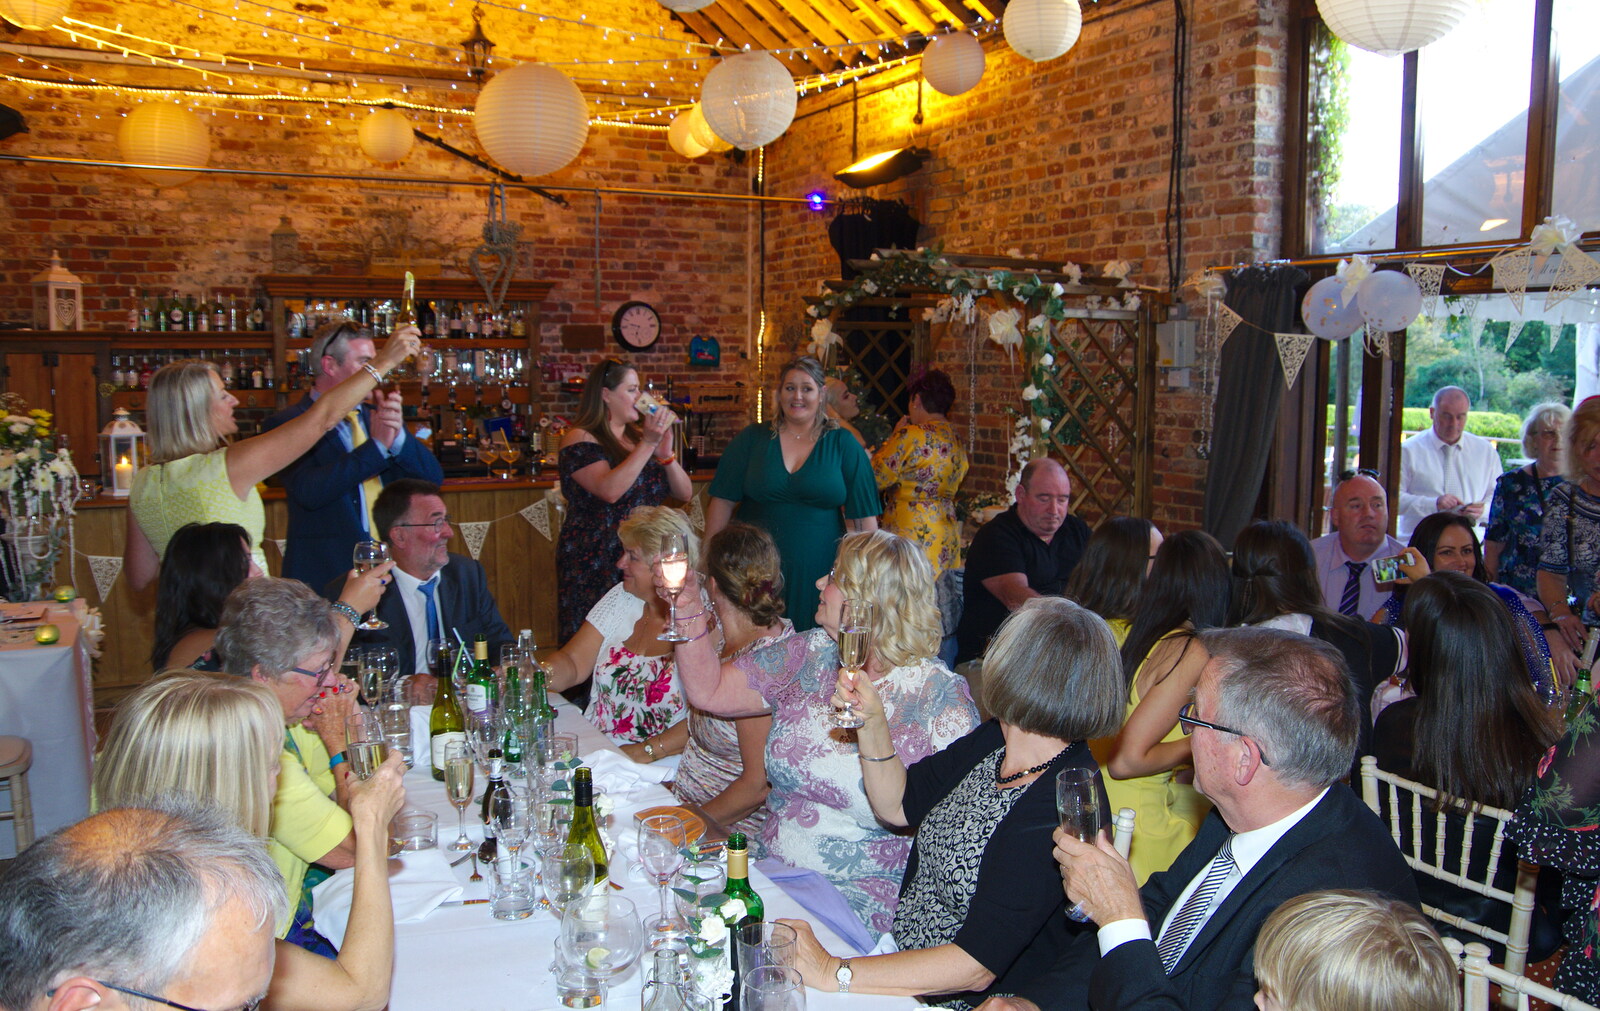 A toast occurs from Neil and Martina's Wedding, The Three Tuns, Bransgore, Dorset - 20th September 2019